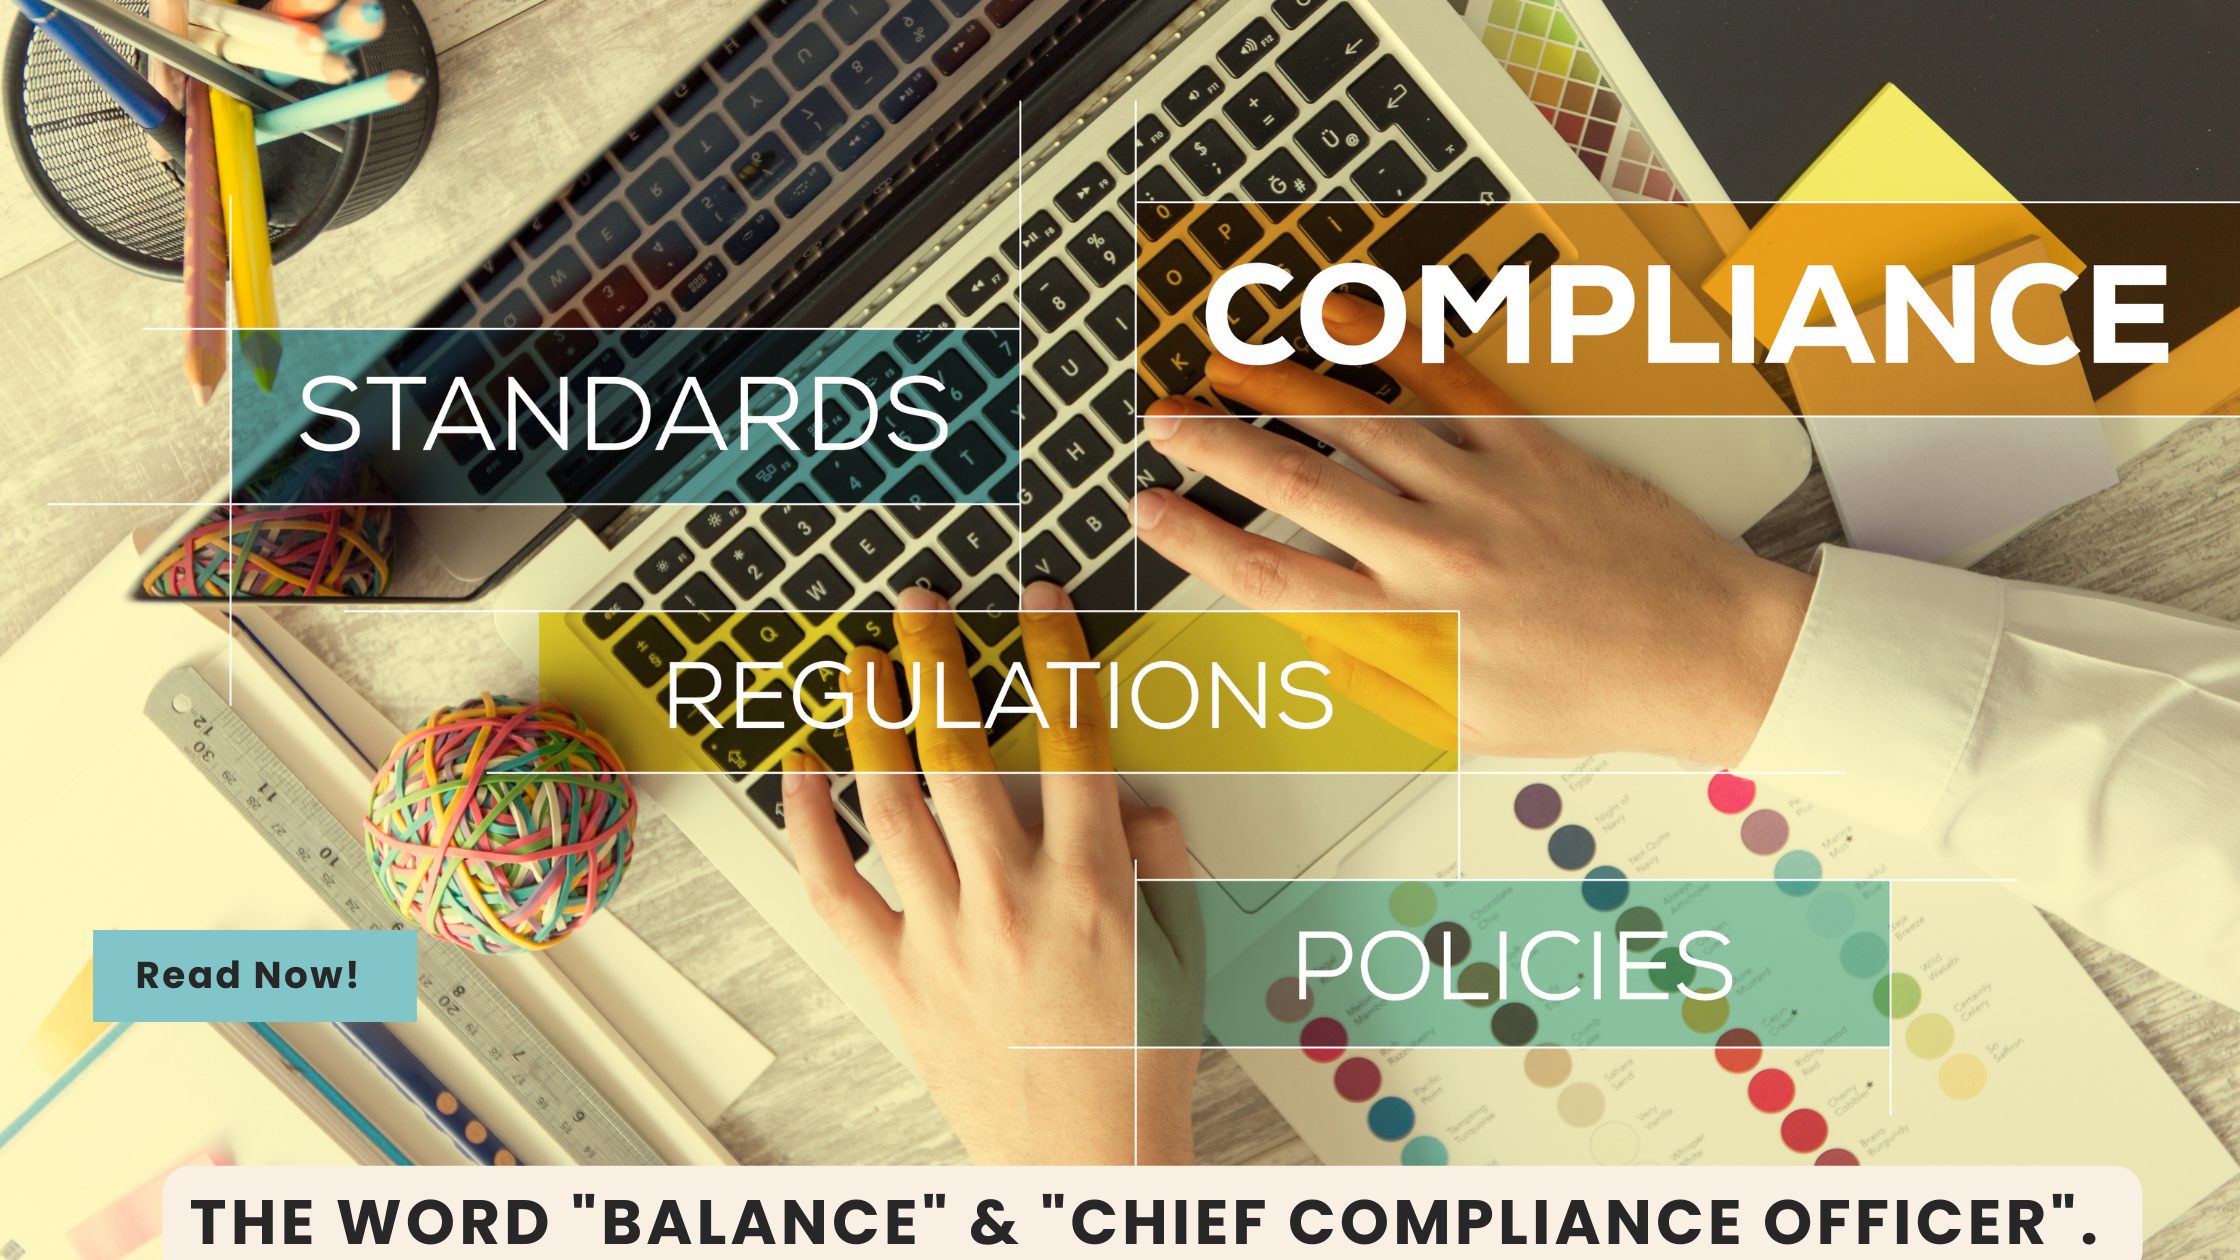 THE WORD “BALANCE” & “CHIEF COMPLIANCE OFFICER”